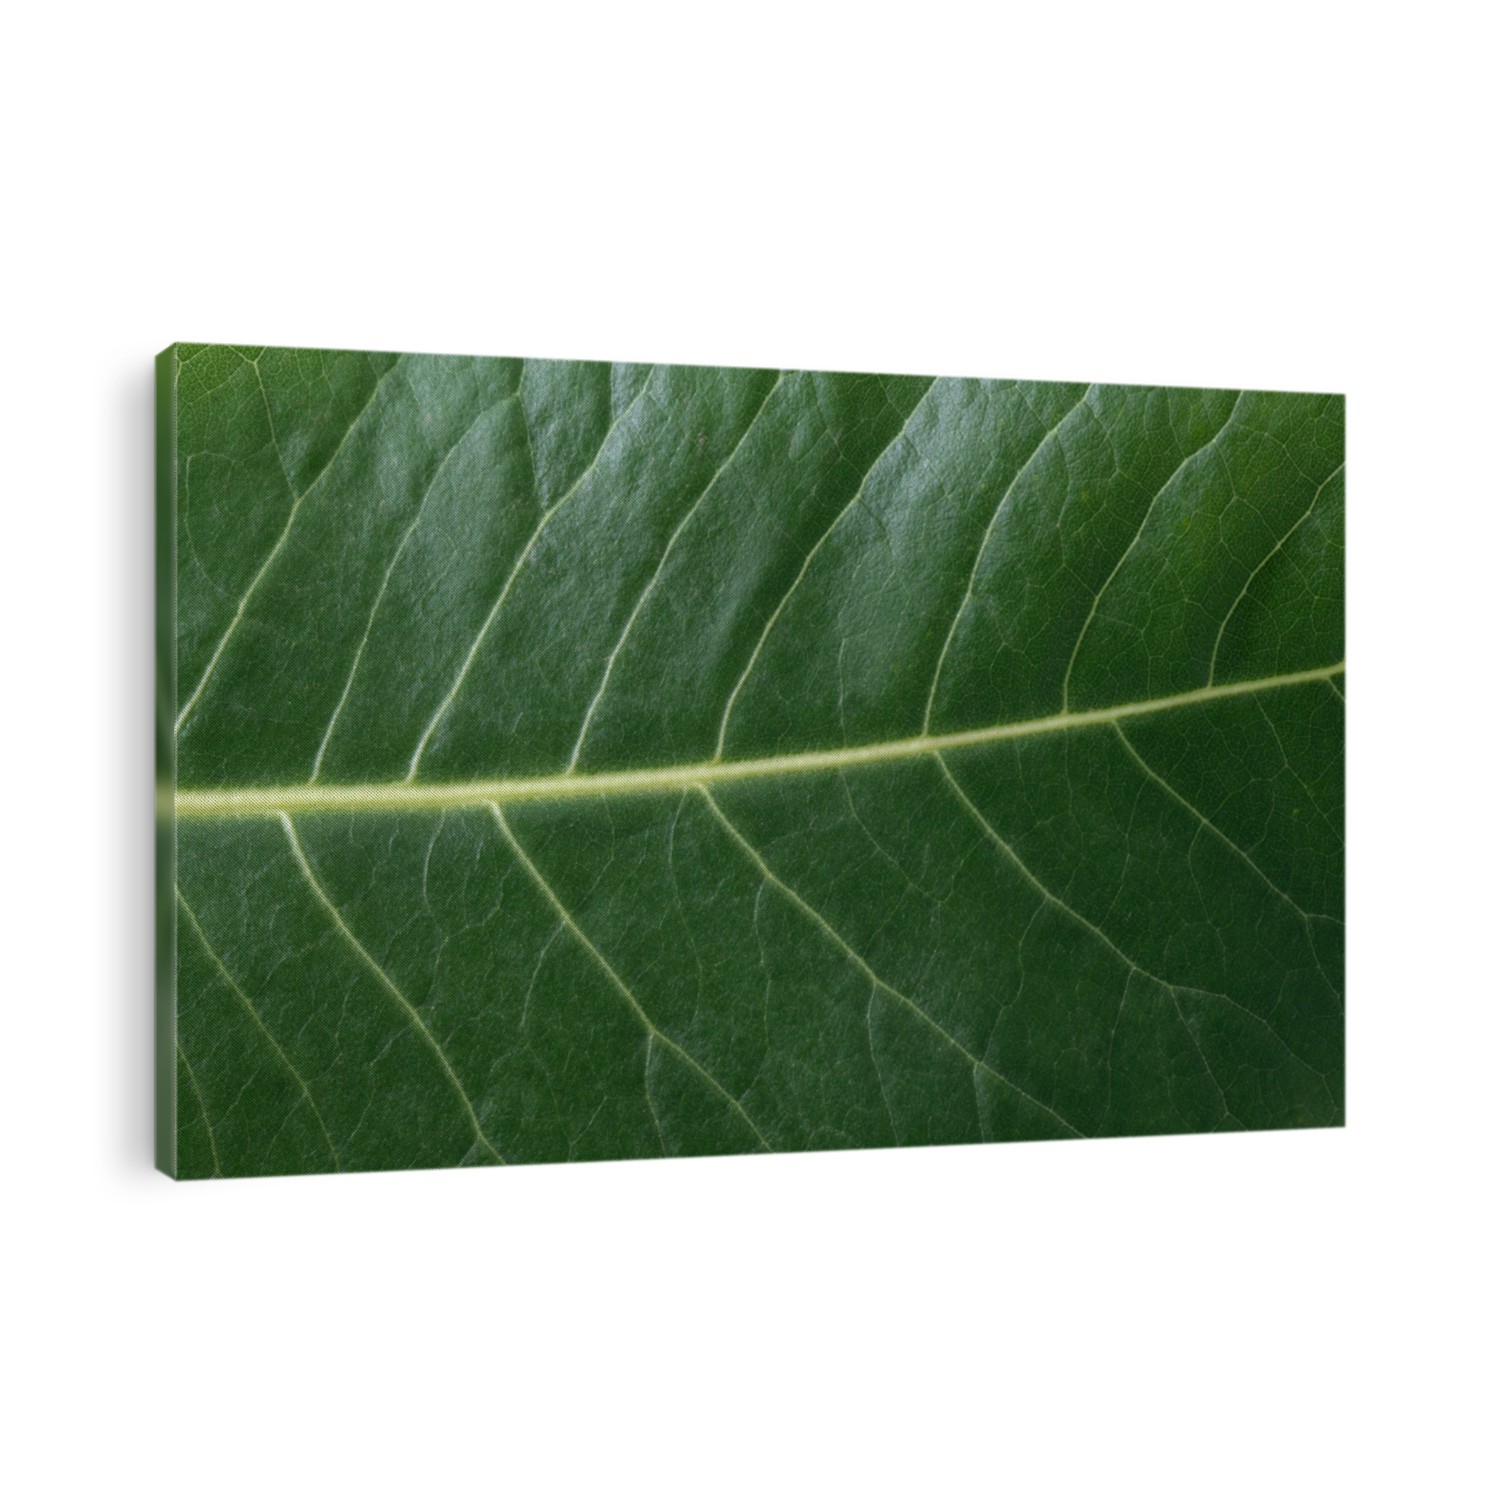 
Ombú or Phytolacca dioica. Macro image of a green leaf of a tree from South America used in Europe as an ornamental in parks and gardens.